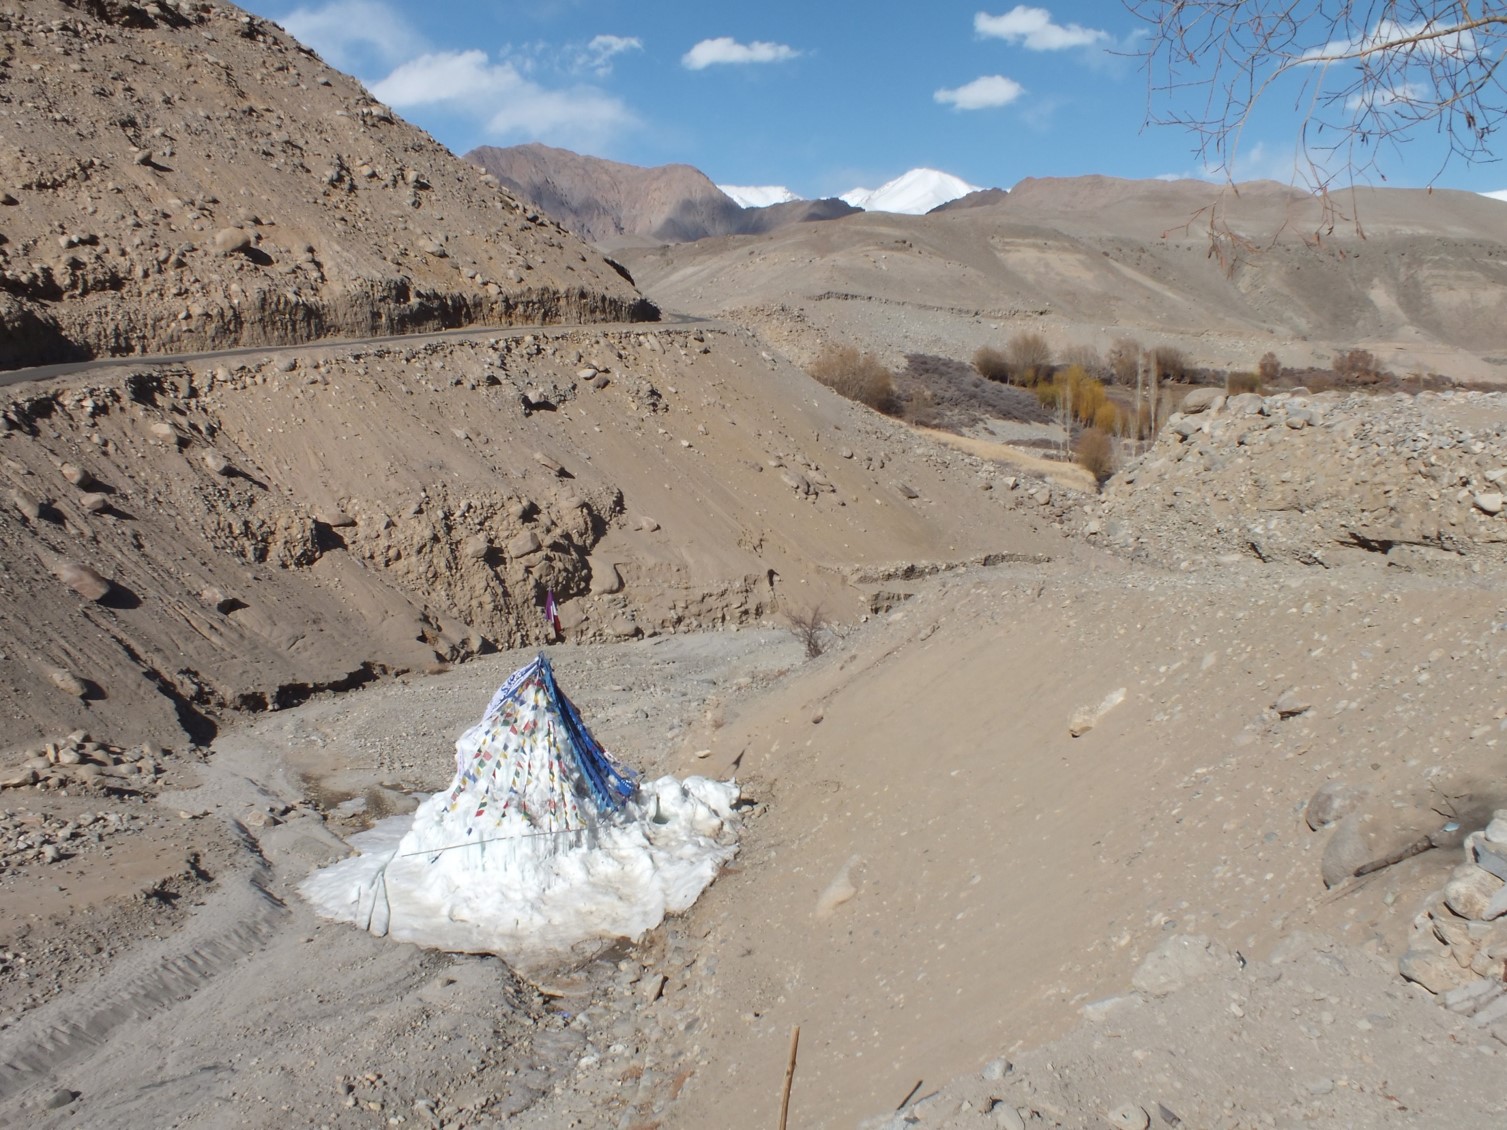 By mid- March all the flat ice on ground had melted, but not Wangchuk's Stupa.